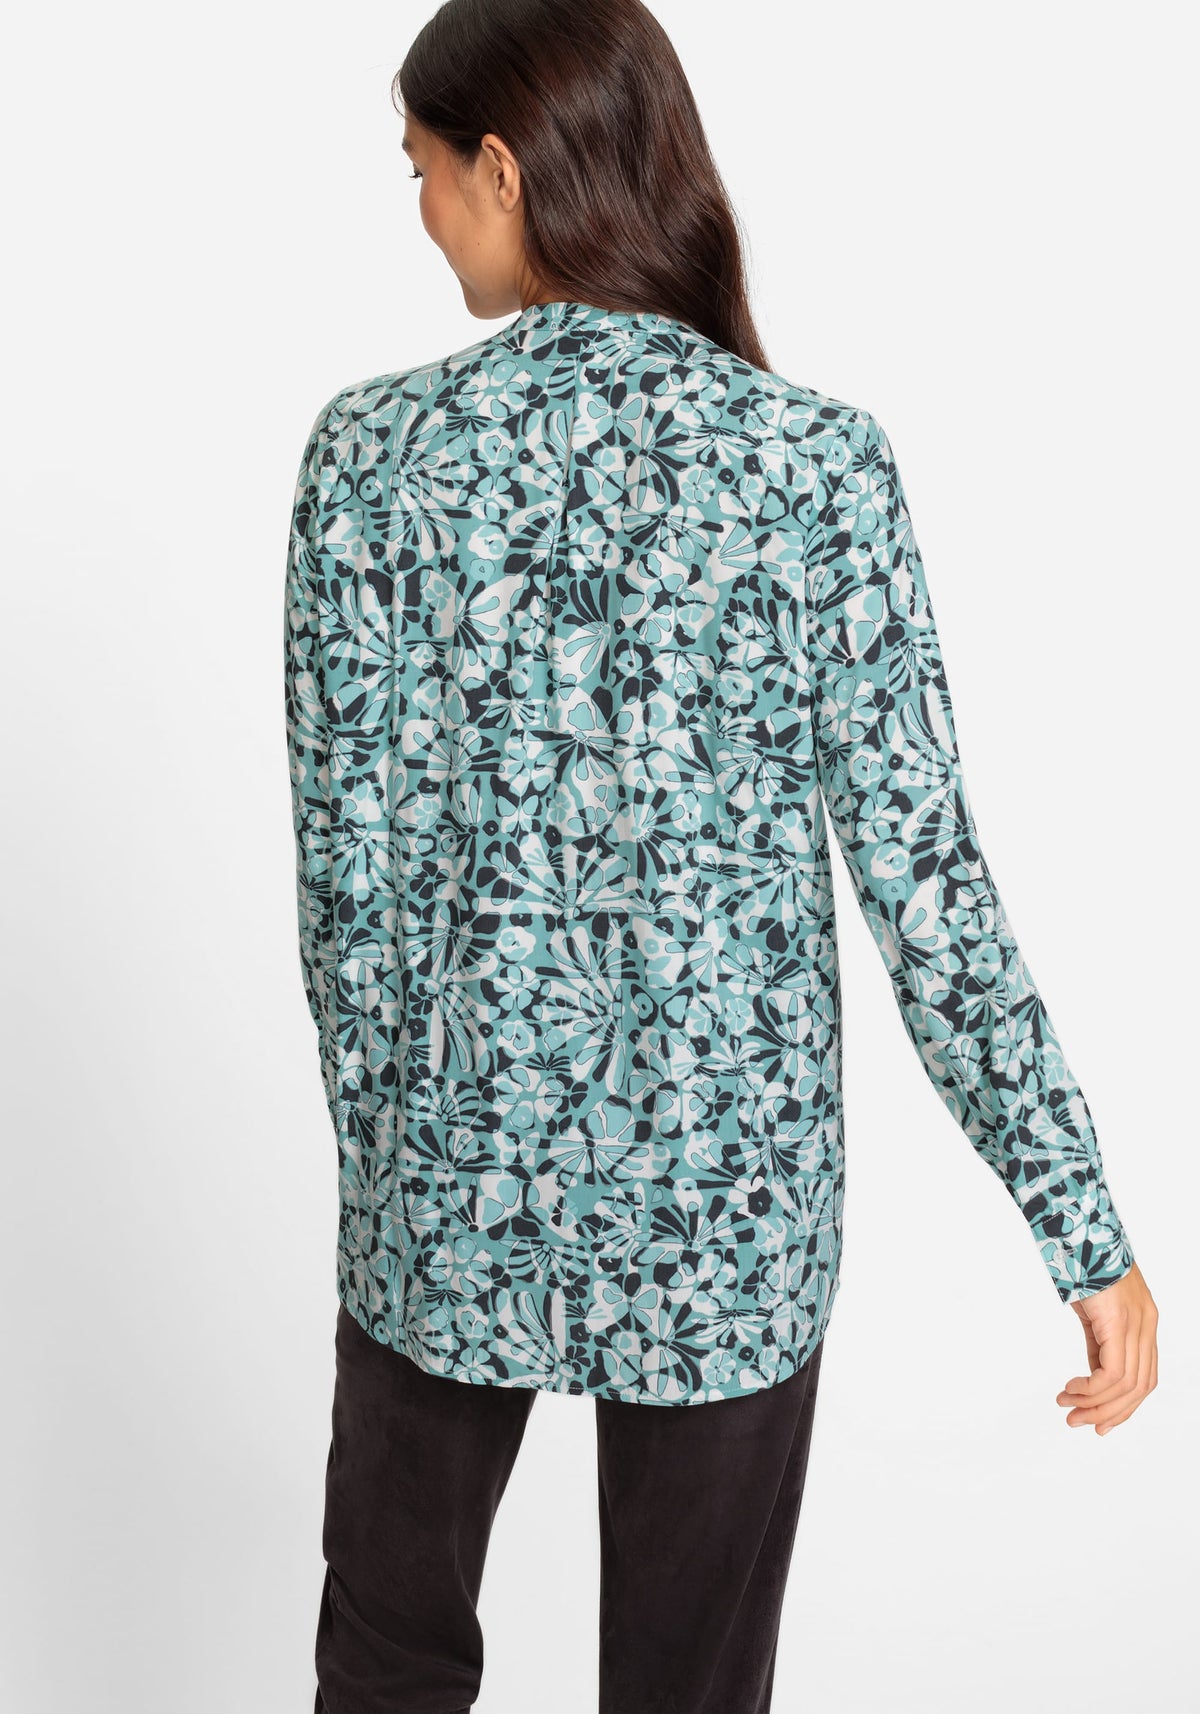 Long Sleeve Abstract Floral Tunic Blouse